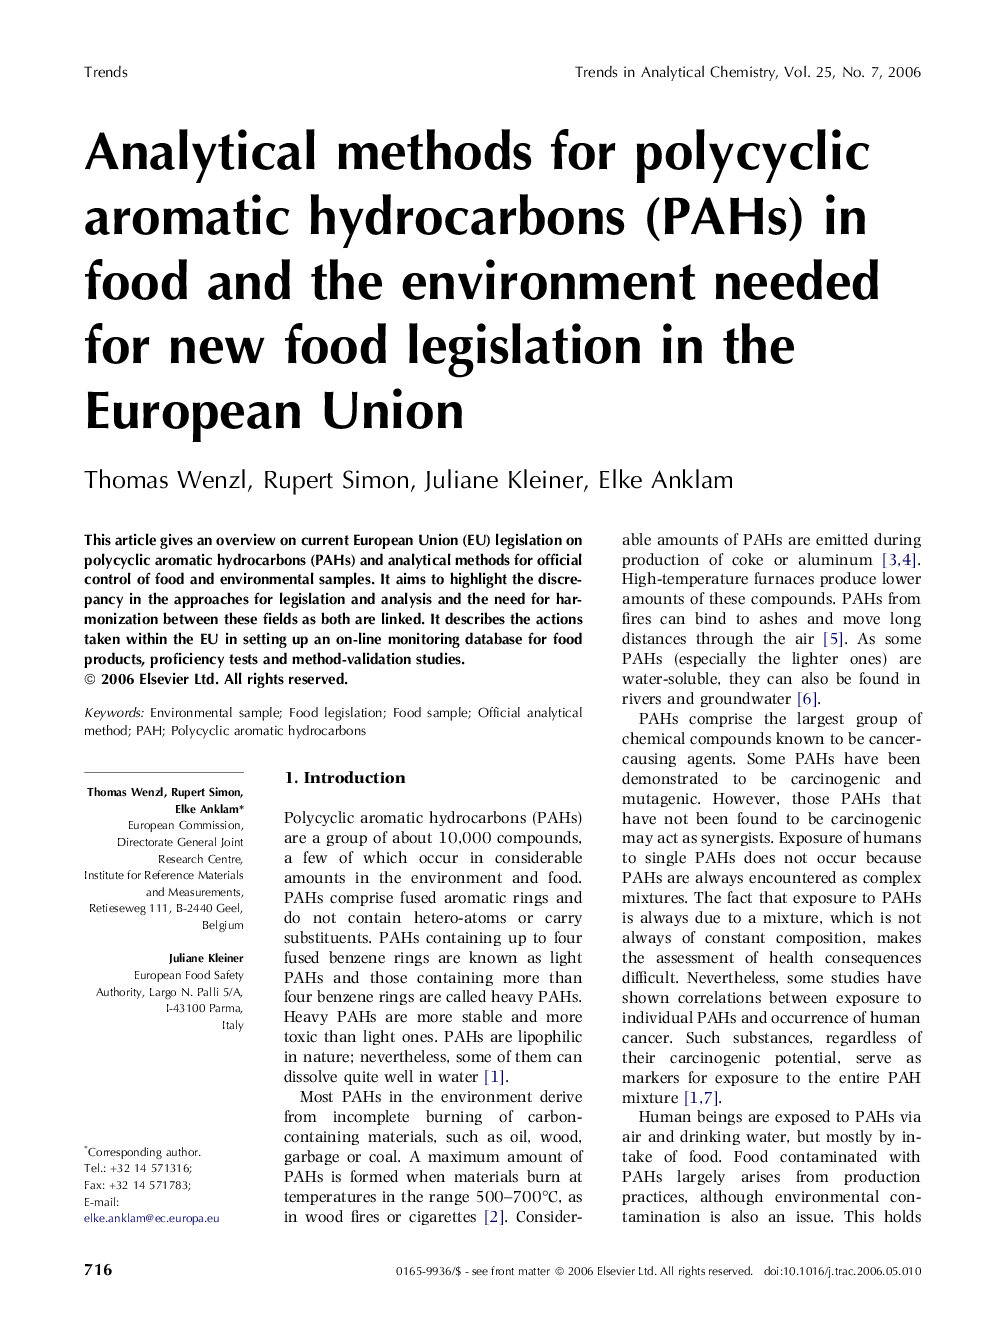 Analytical methods for polycyclic aromatic hydrocarbons (PAHs) in food and the environment needed for new food legislation in the European Union